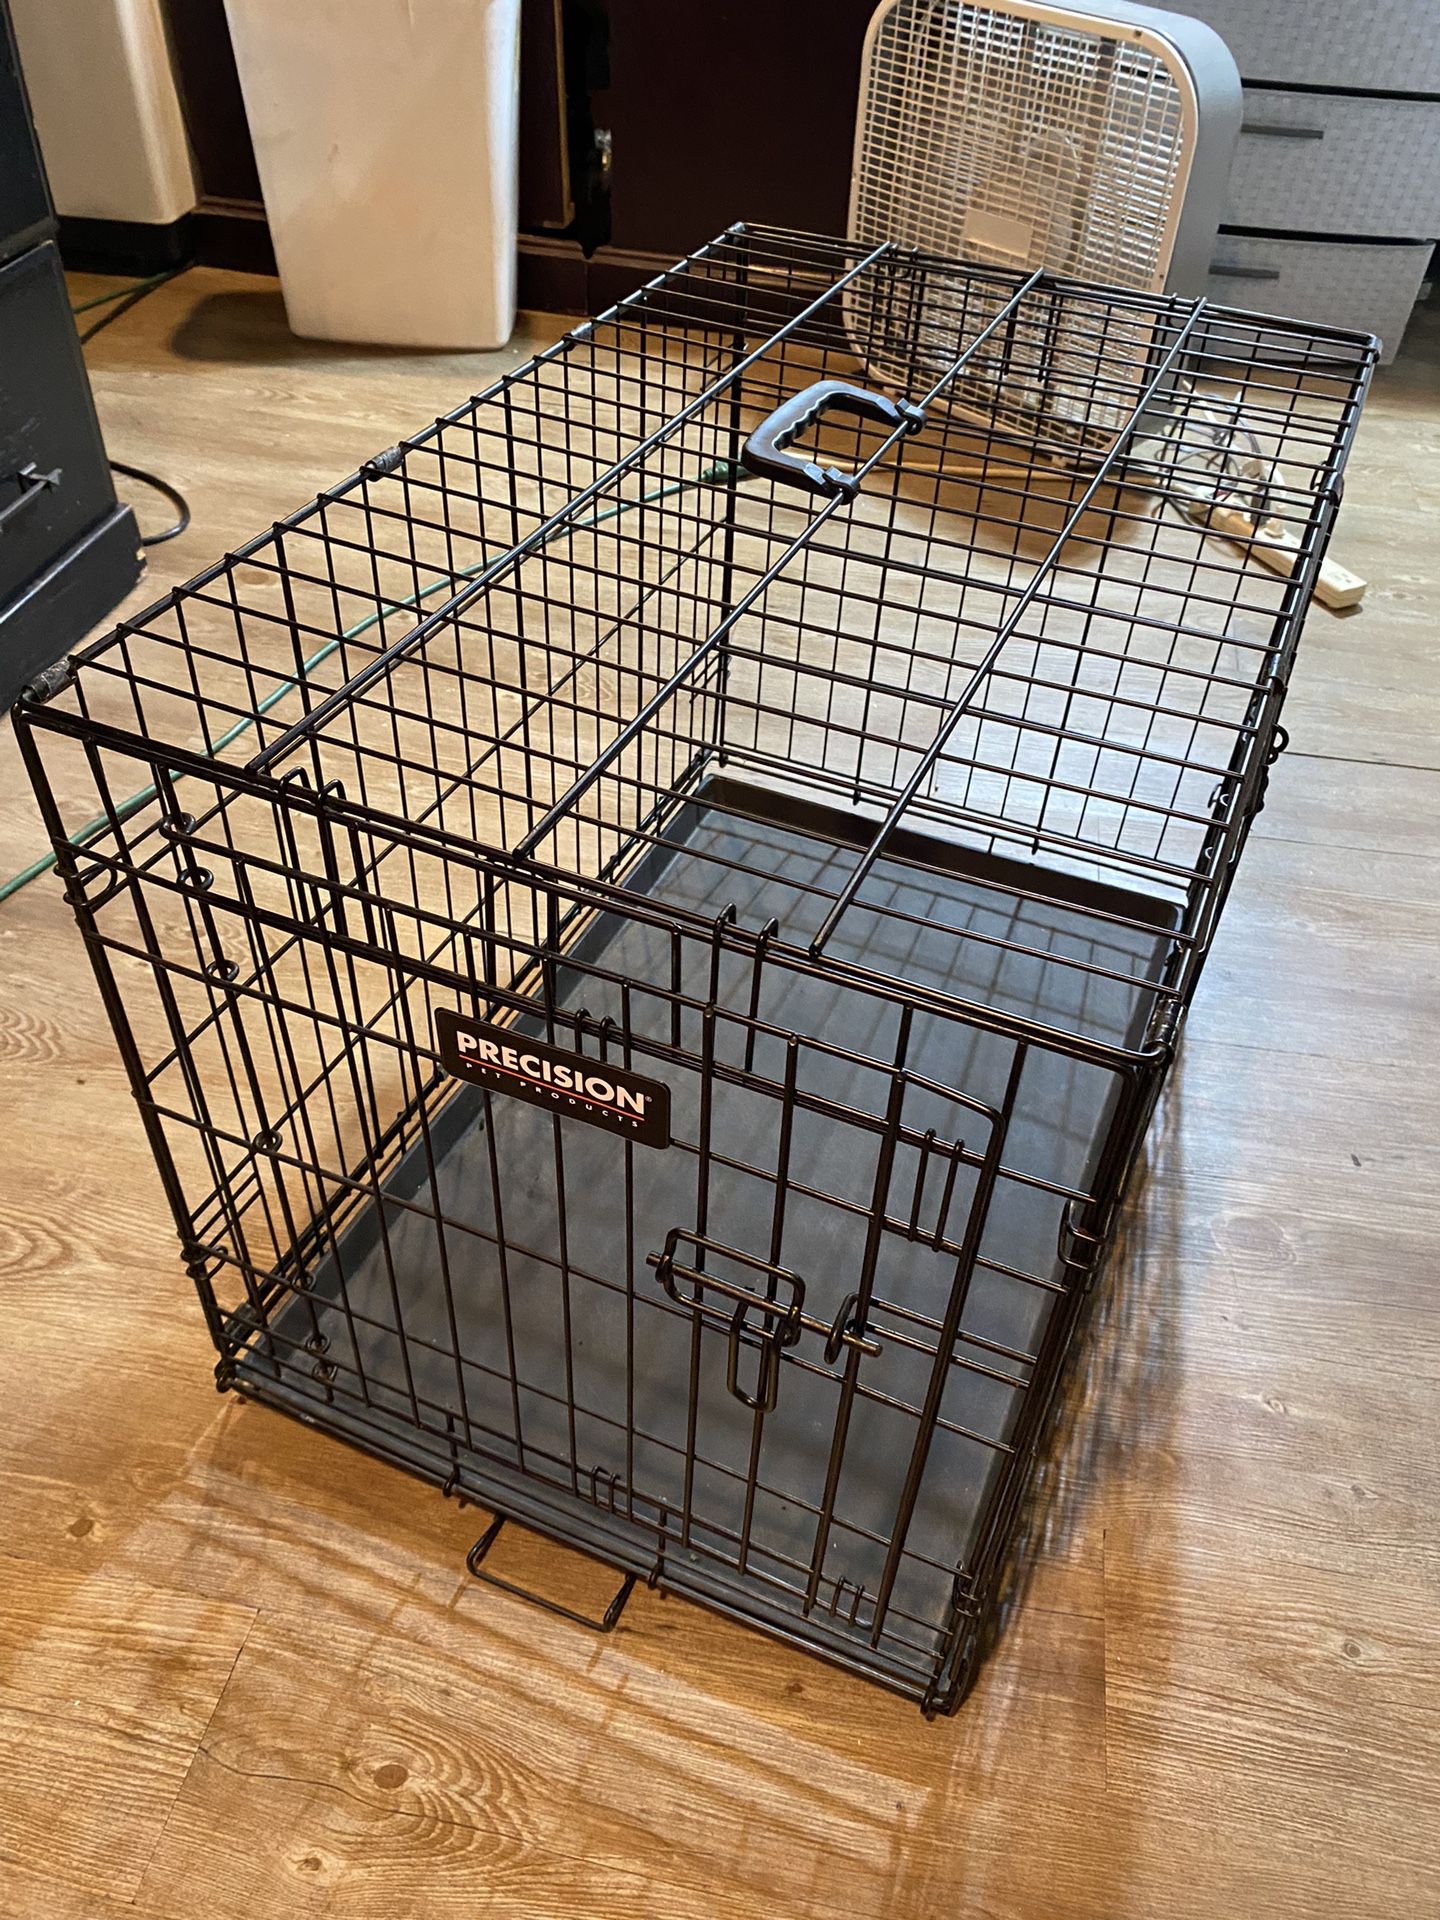 Like New Dog Training Crate With Double Door, Dog Cage, Animal Cage 